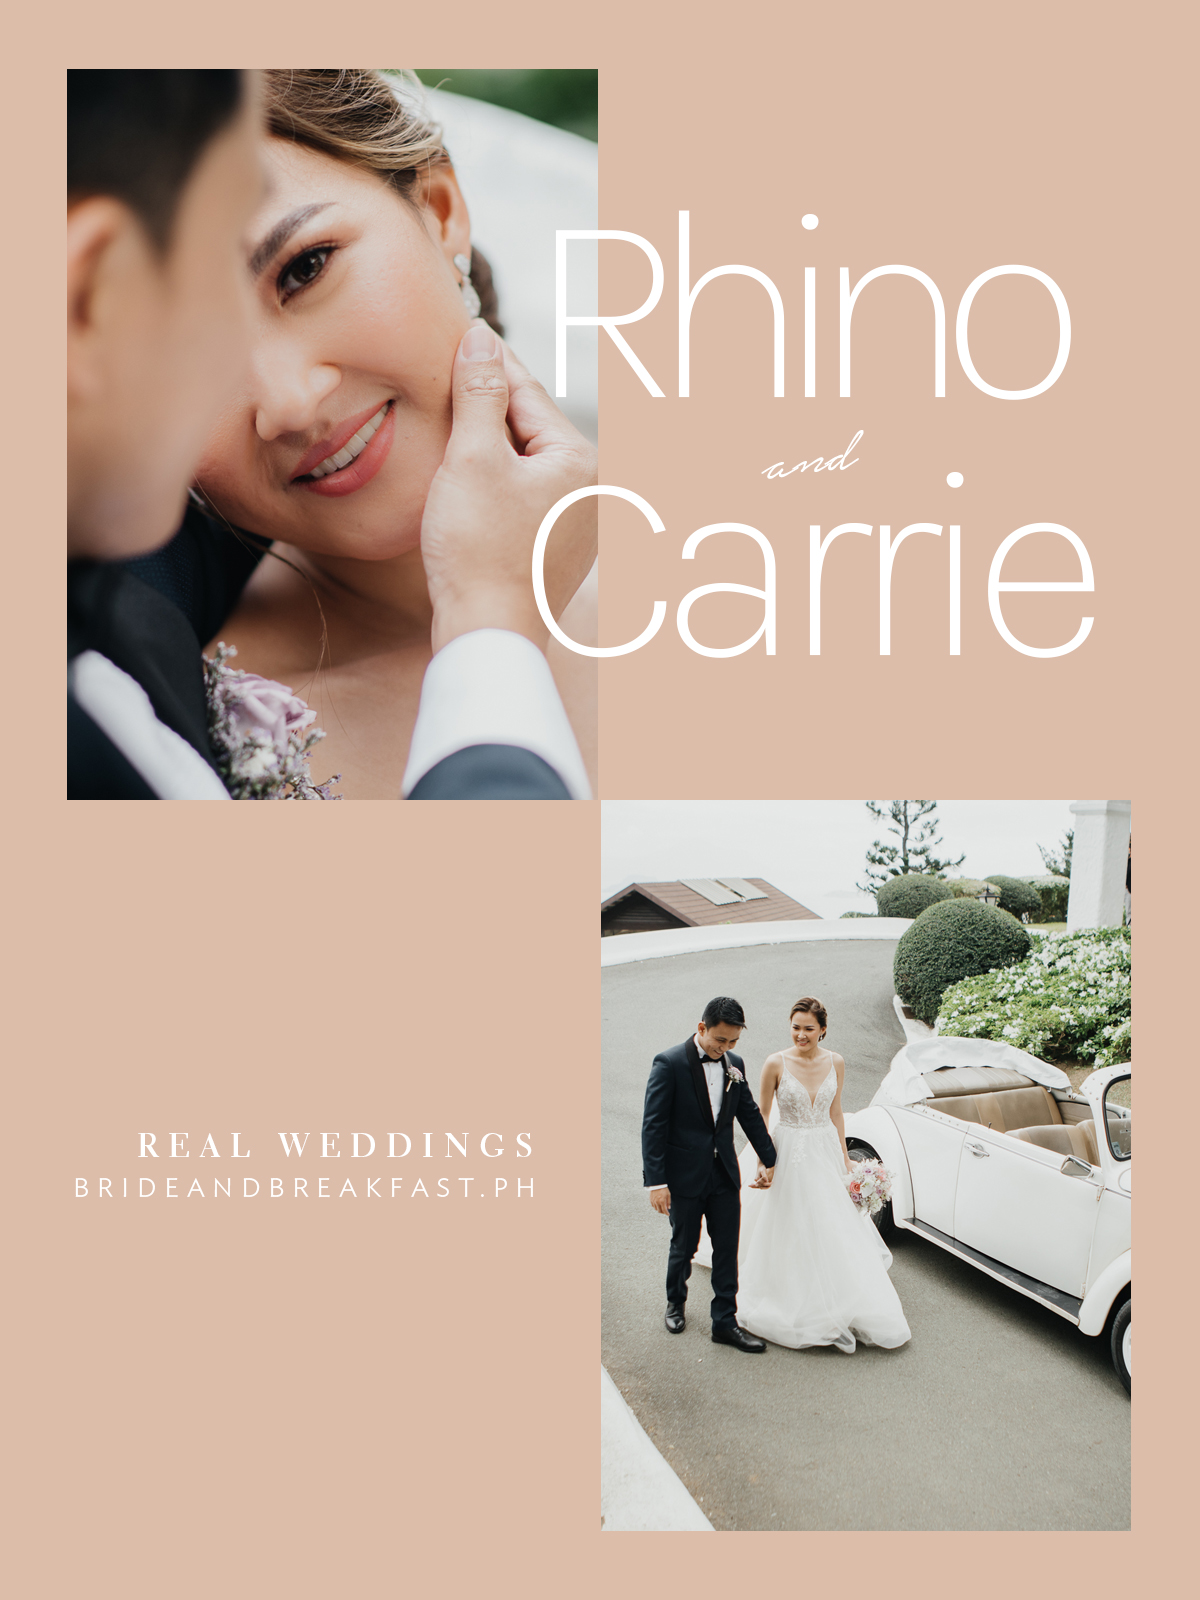 Rhino and Carrie